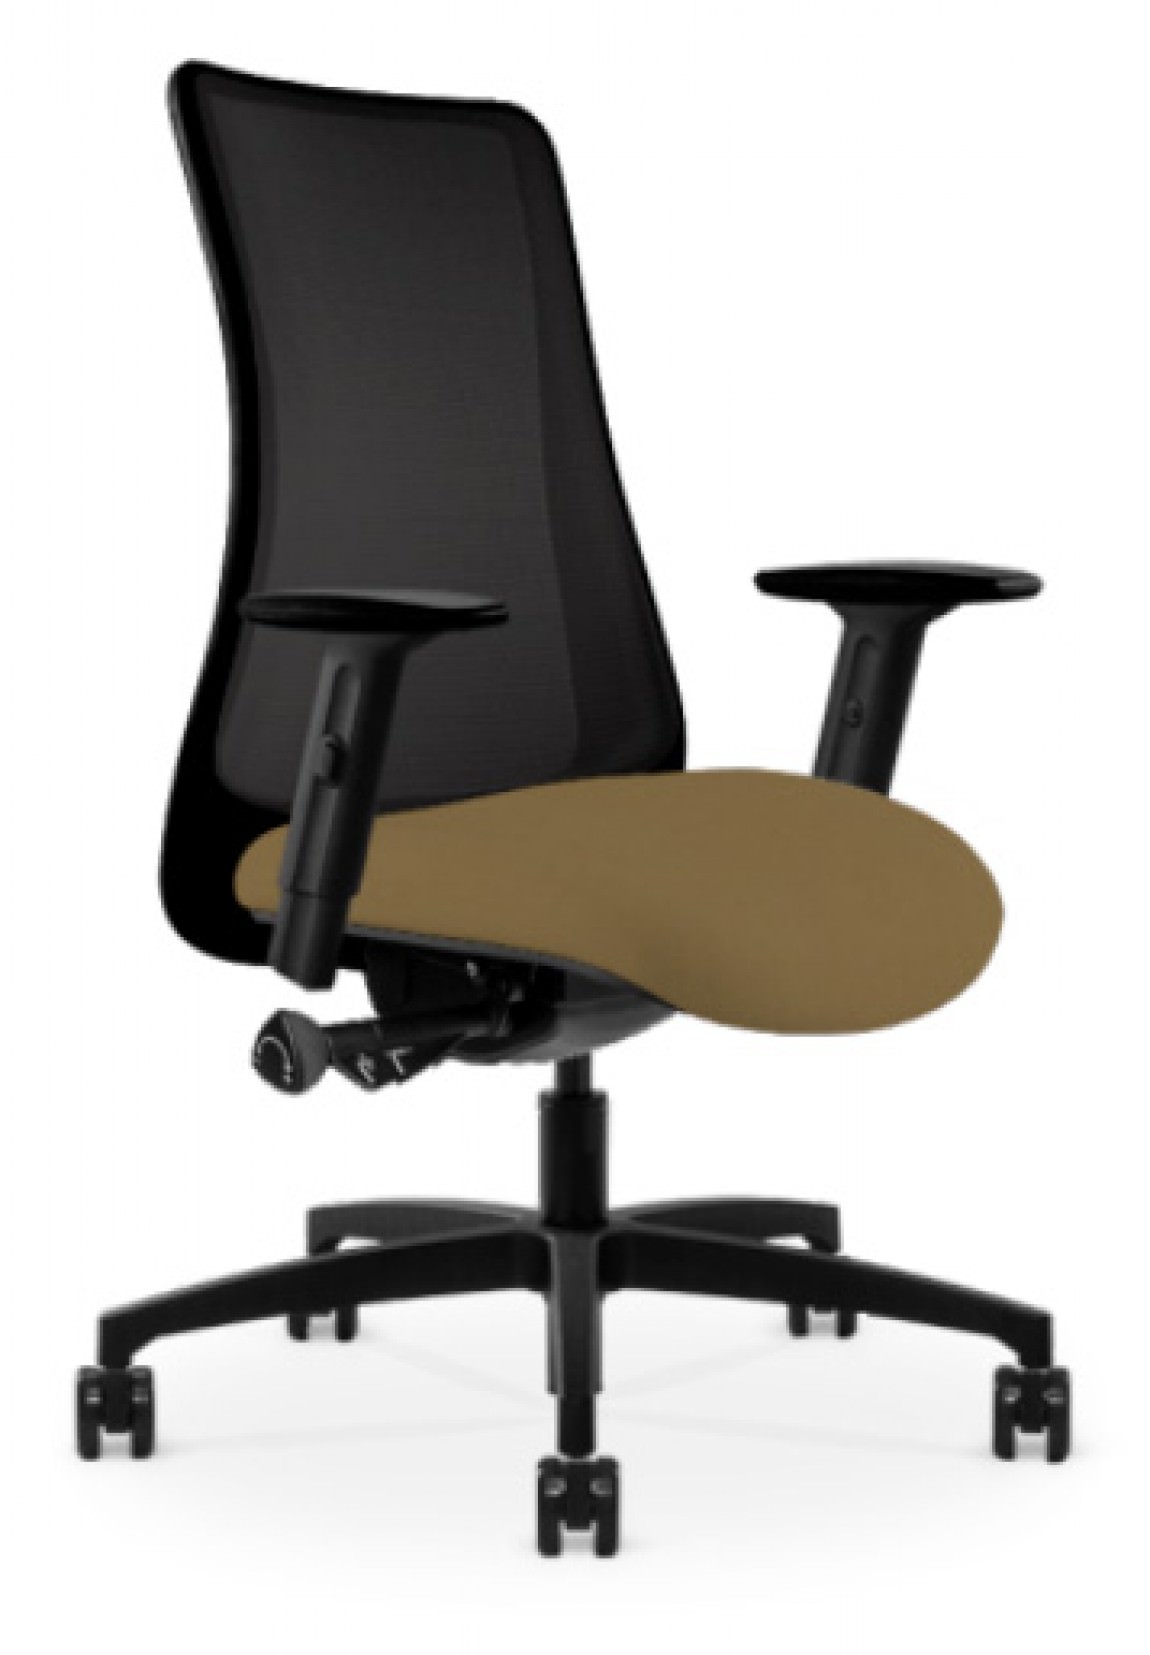 Black Copper Mesh Antimicrobial Office Chair w/ Silvertex Bronze Seat